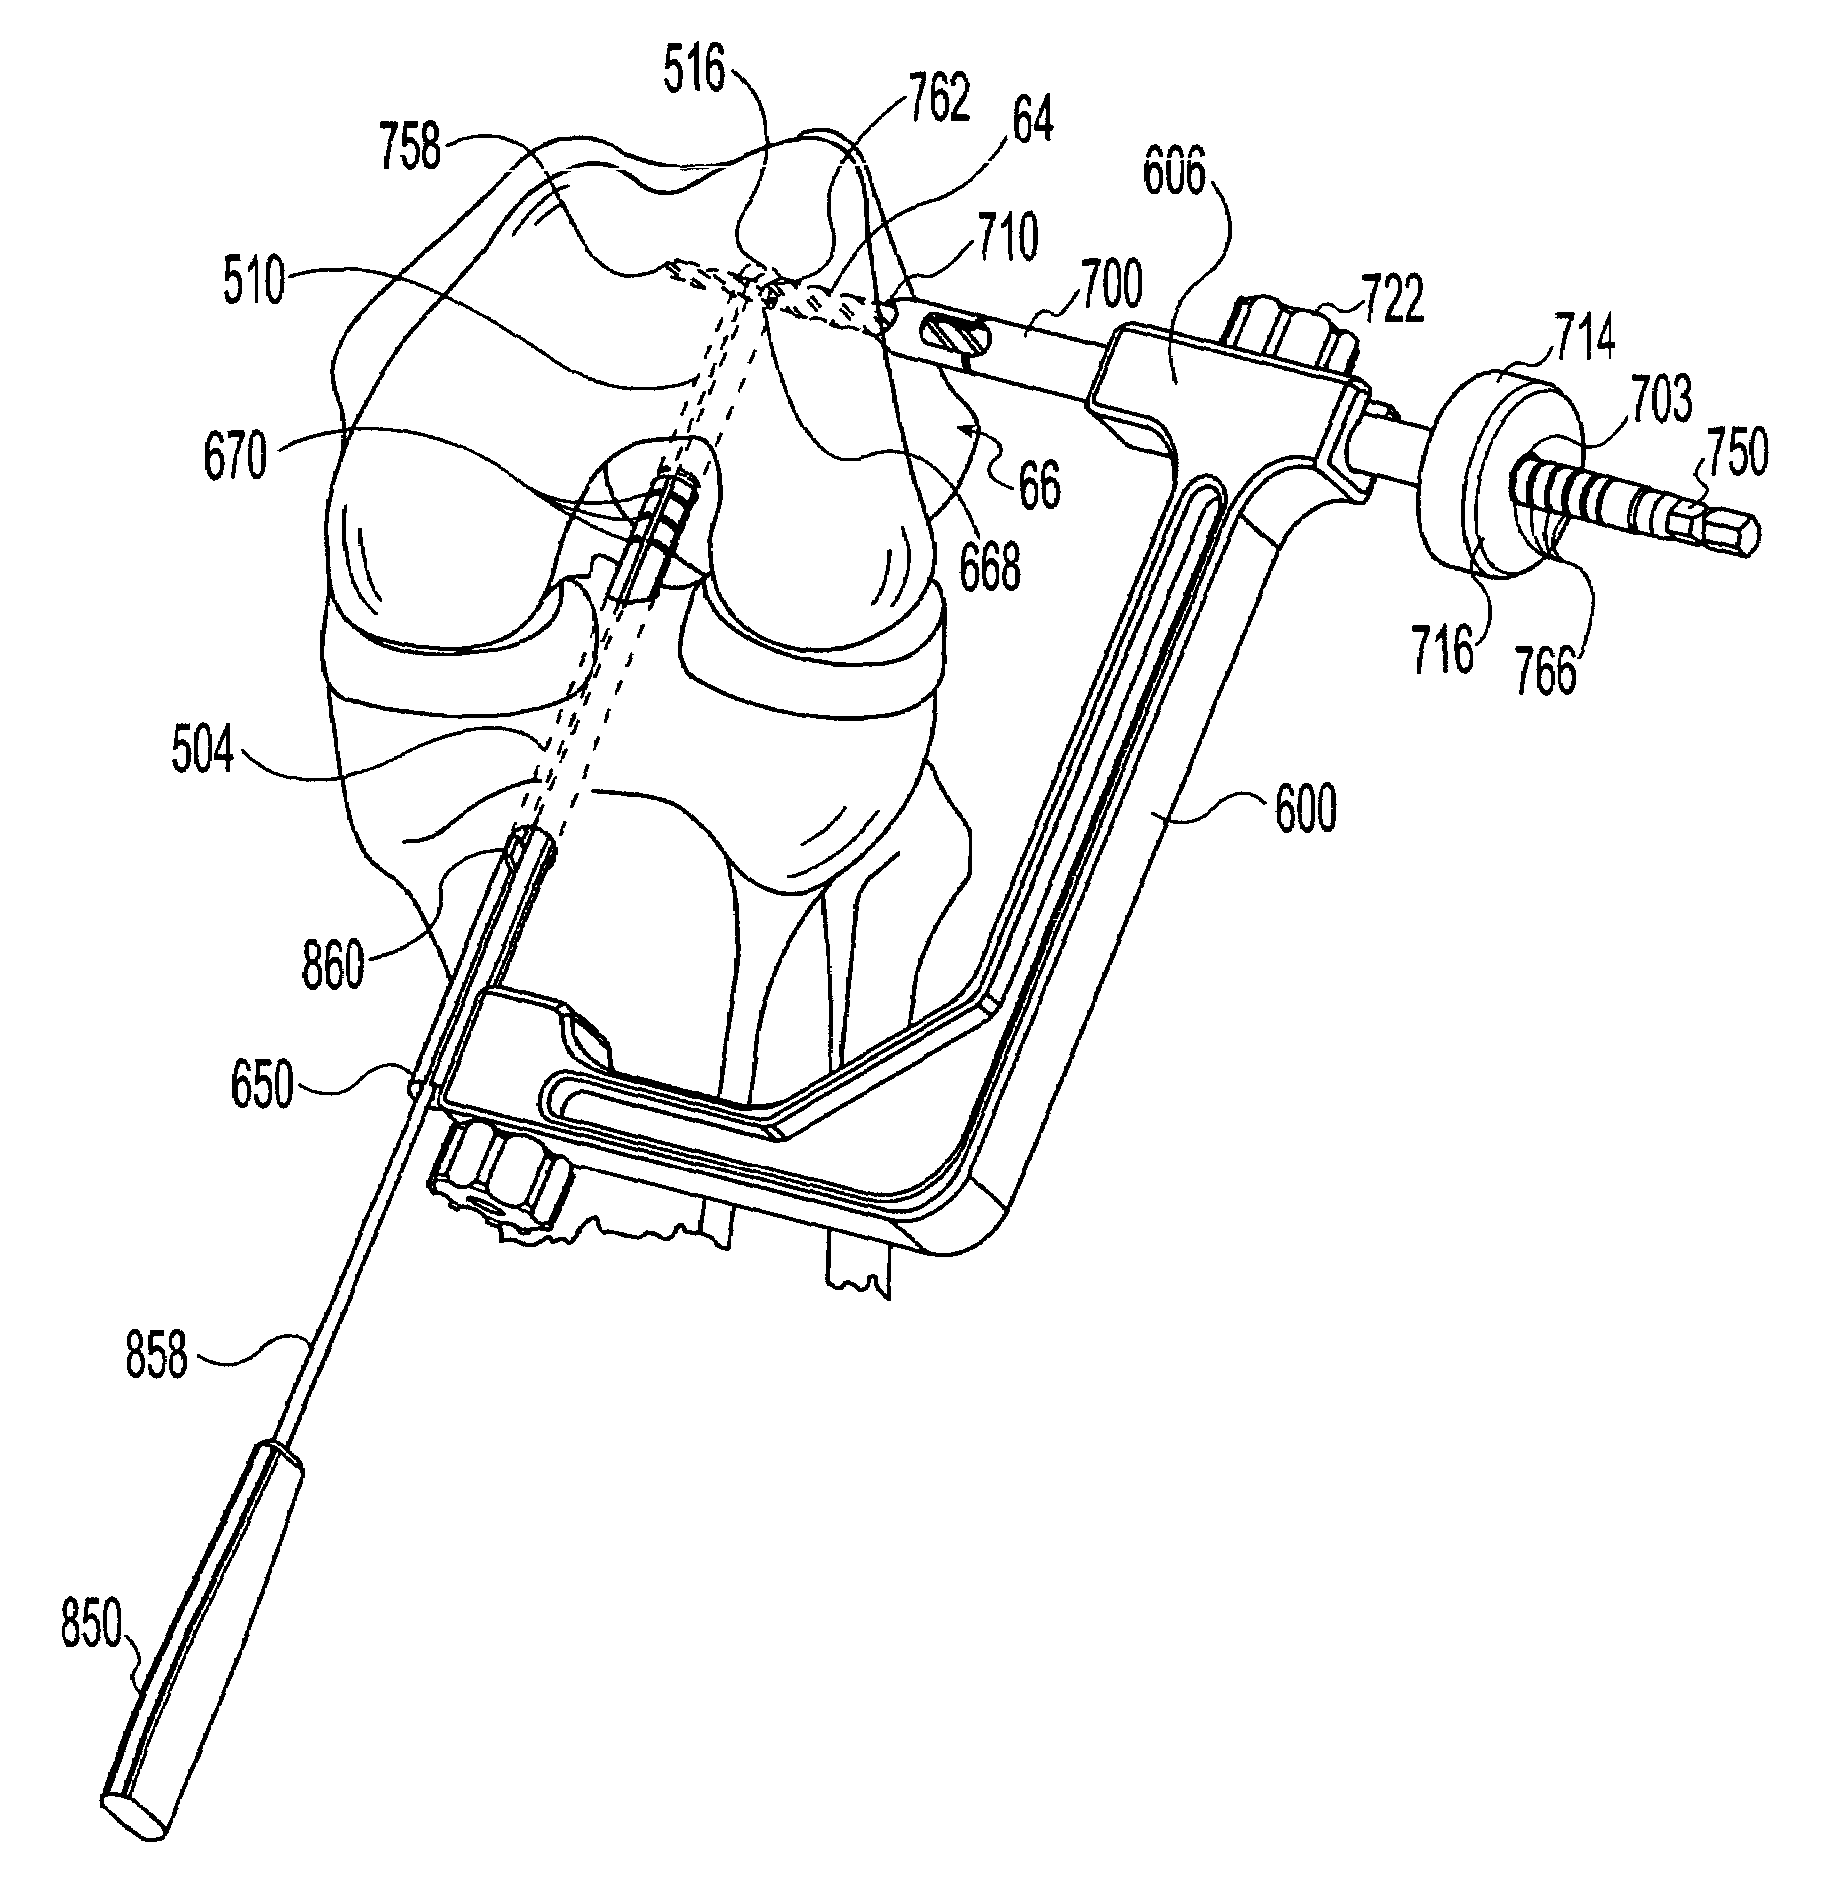 Cross-pin graft fixation instruments and method